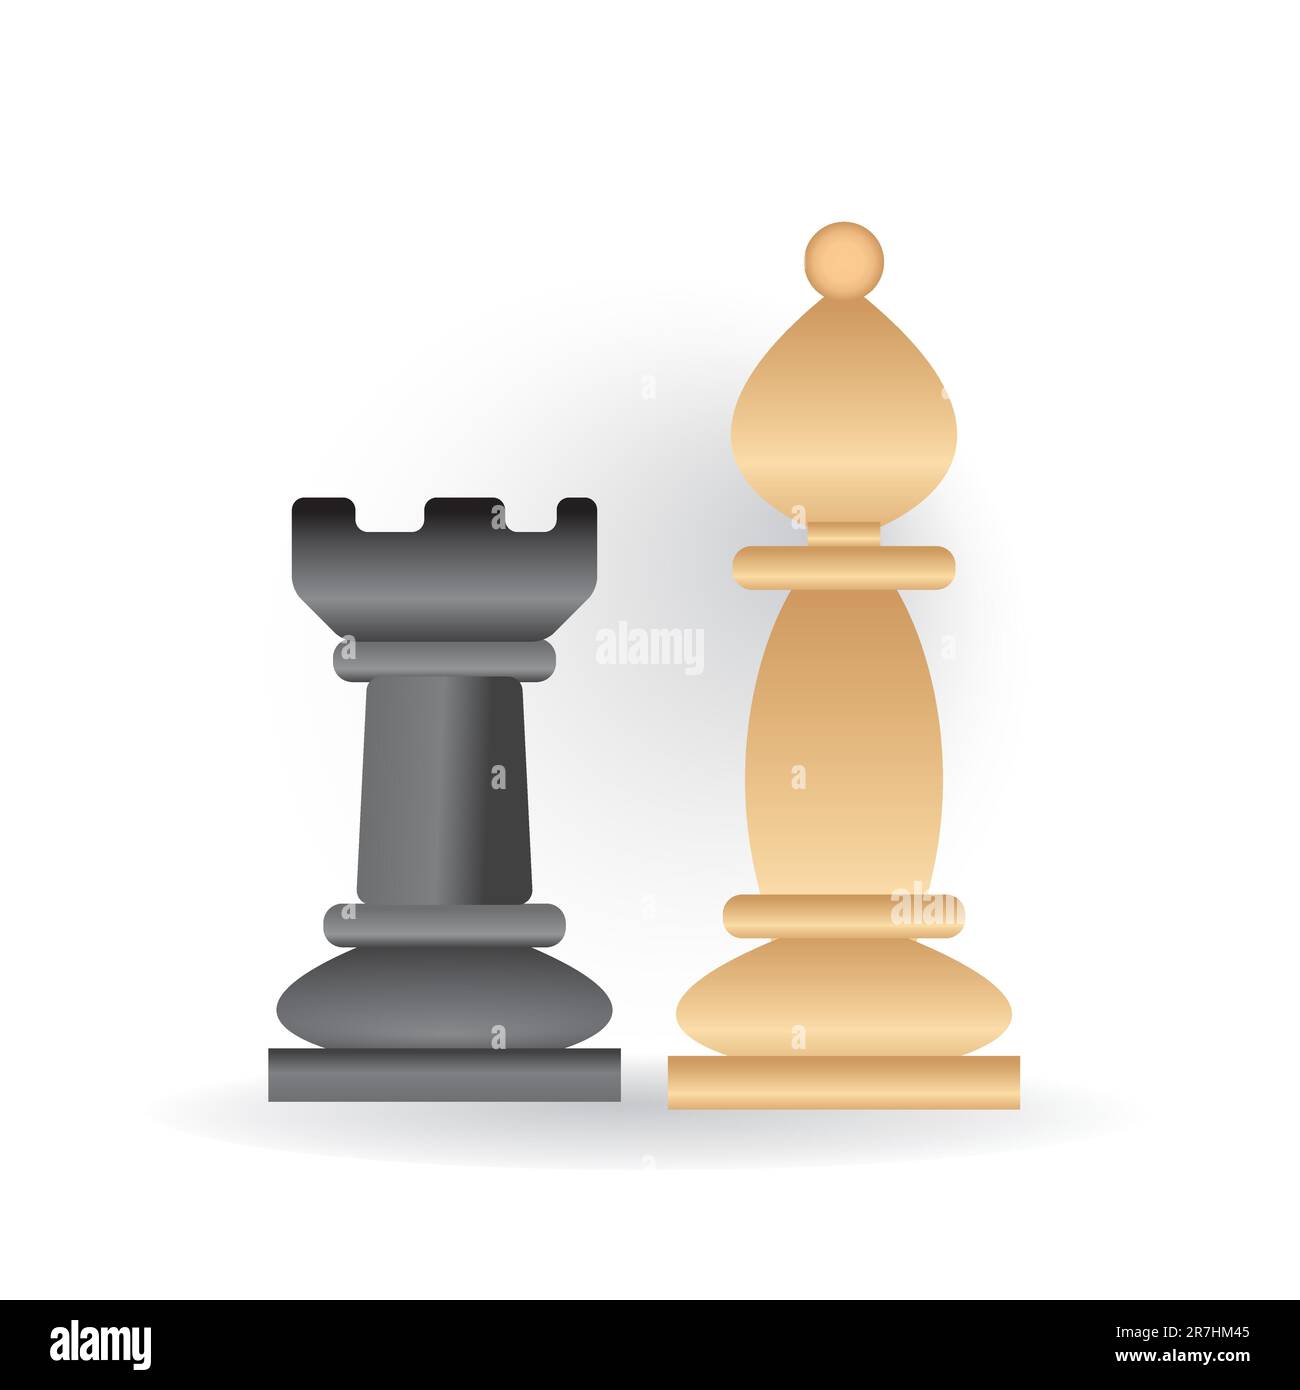 isometric vector image on a blue background, chess pieces and their names,  school of chess Stock Vector